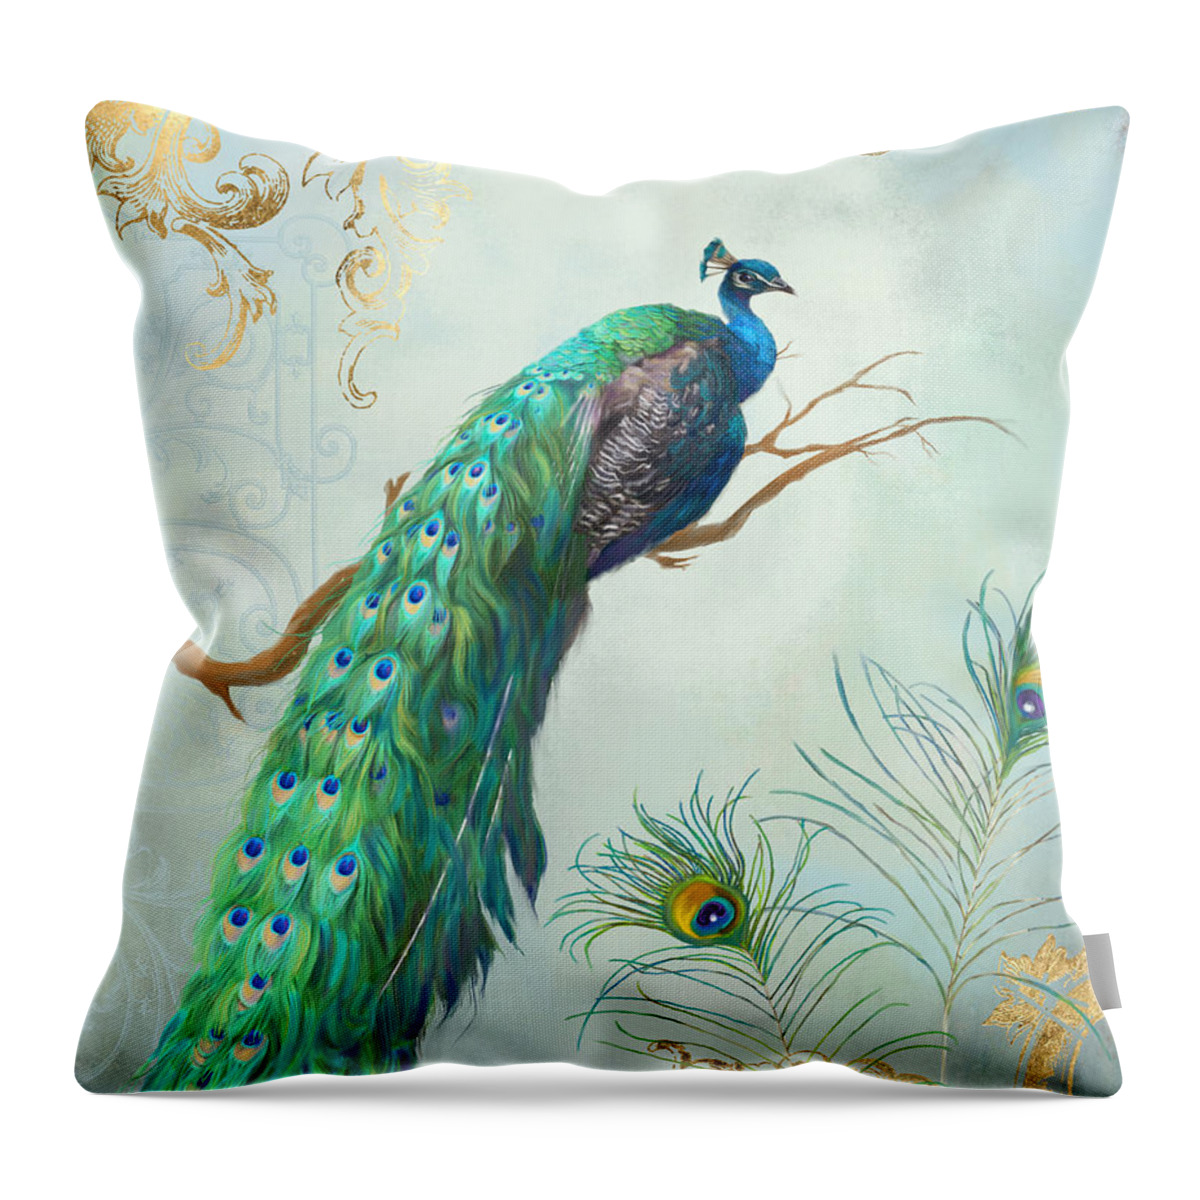 Peacock On Tree Branch Throw Pillow featuring the painting Regal Peacock 1 on Tree Branch w Feathers Gold Leaf by Audrey Jeanne Roberts